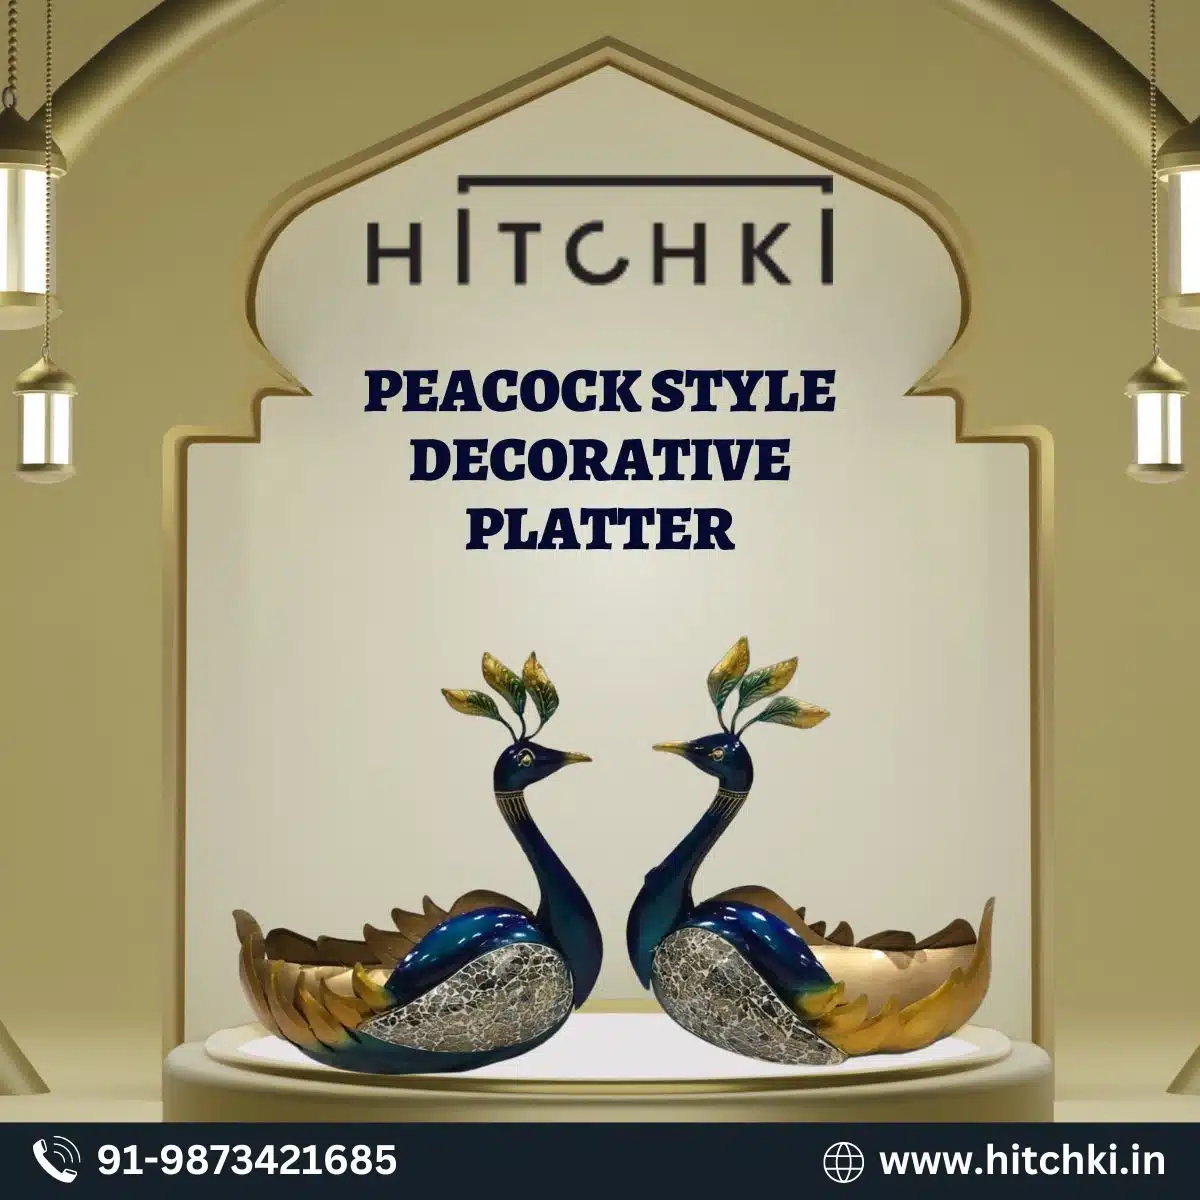 Buy Peacock Style Decorative Platter From Hitchki